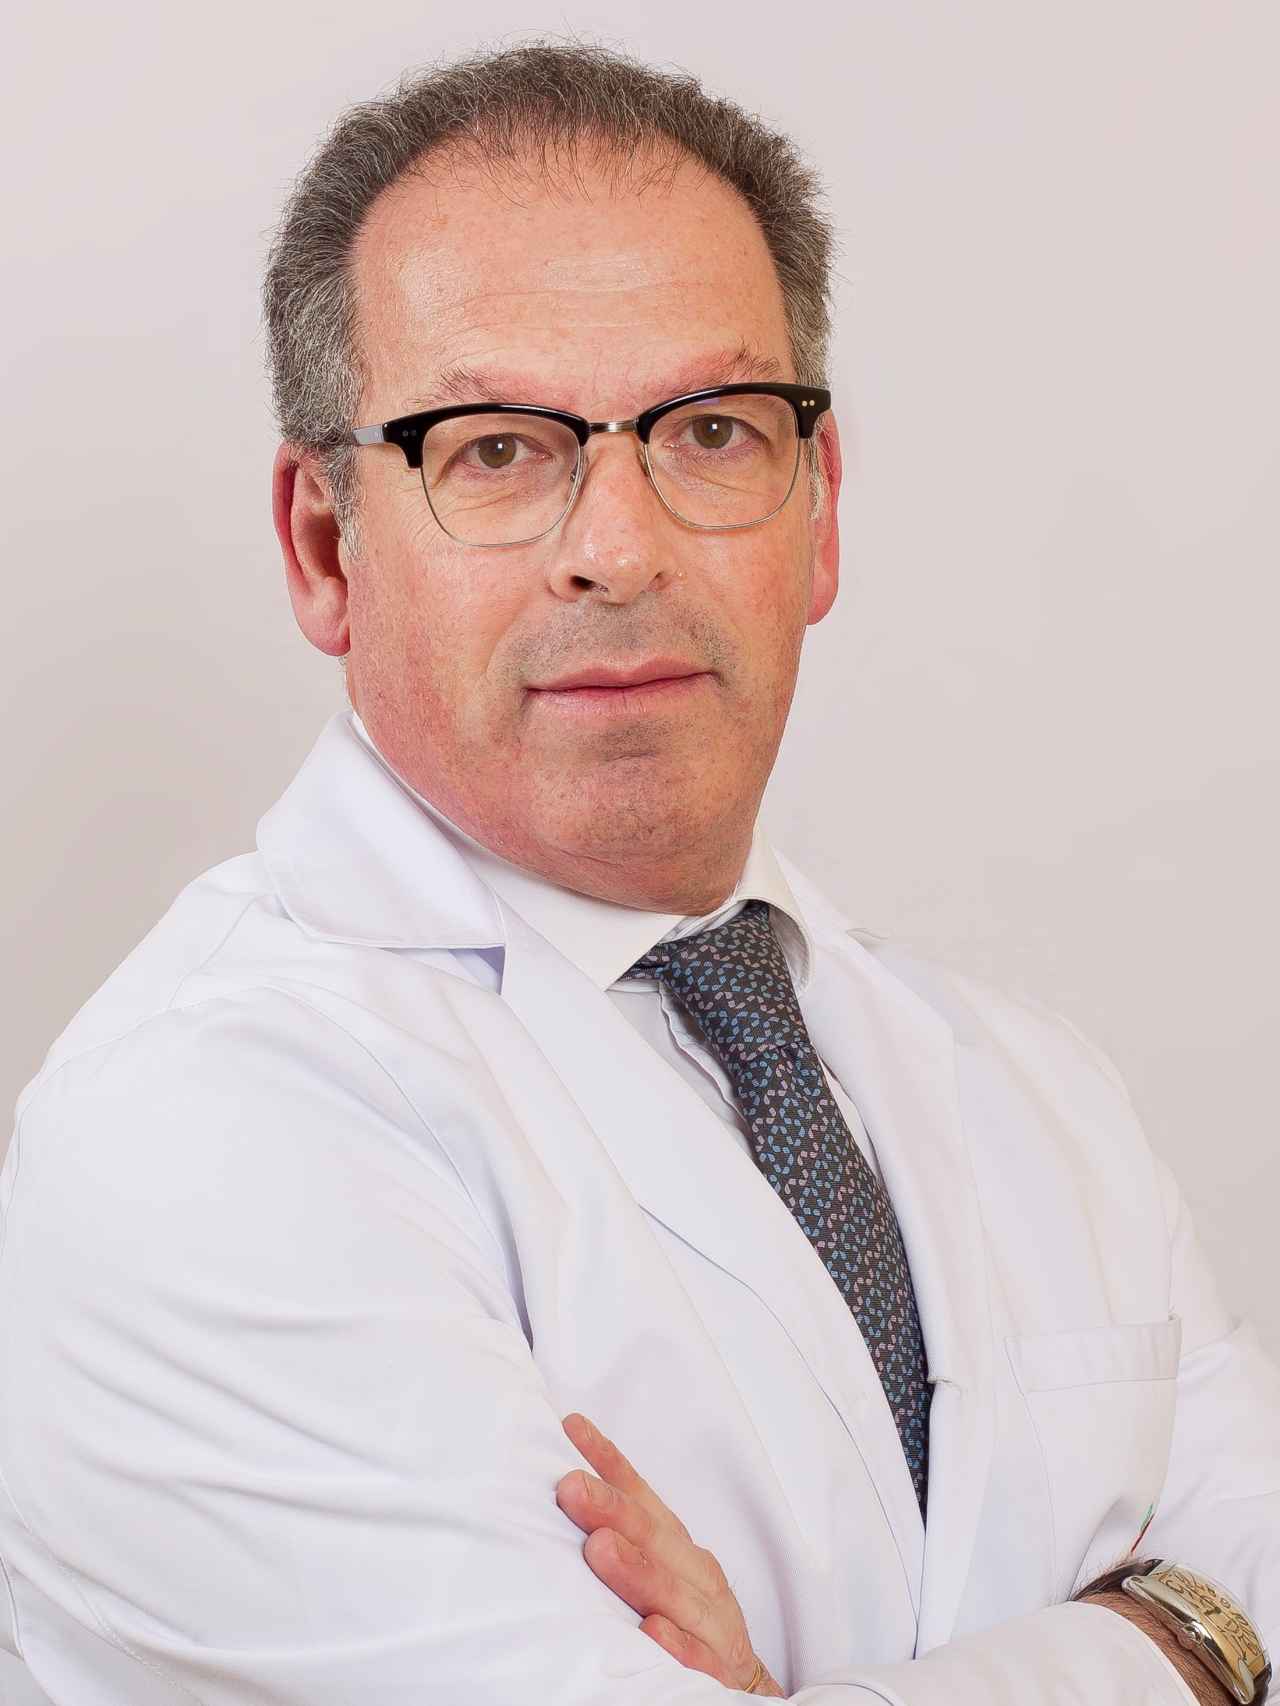 Enrique Puras Mallagray, Head of the Department of Angiology and Vascular Surgery at Olimpia Quironsalud and the Quironsalud University Hospital of Madrid